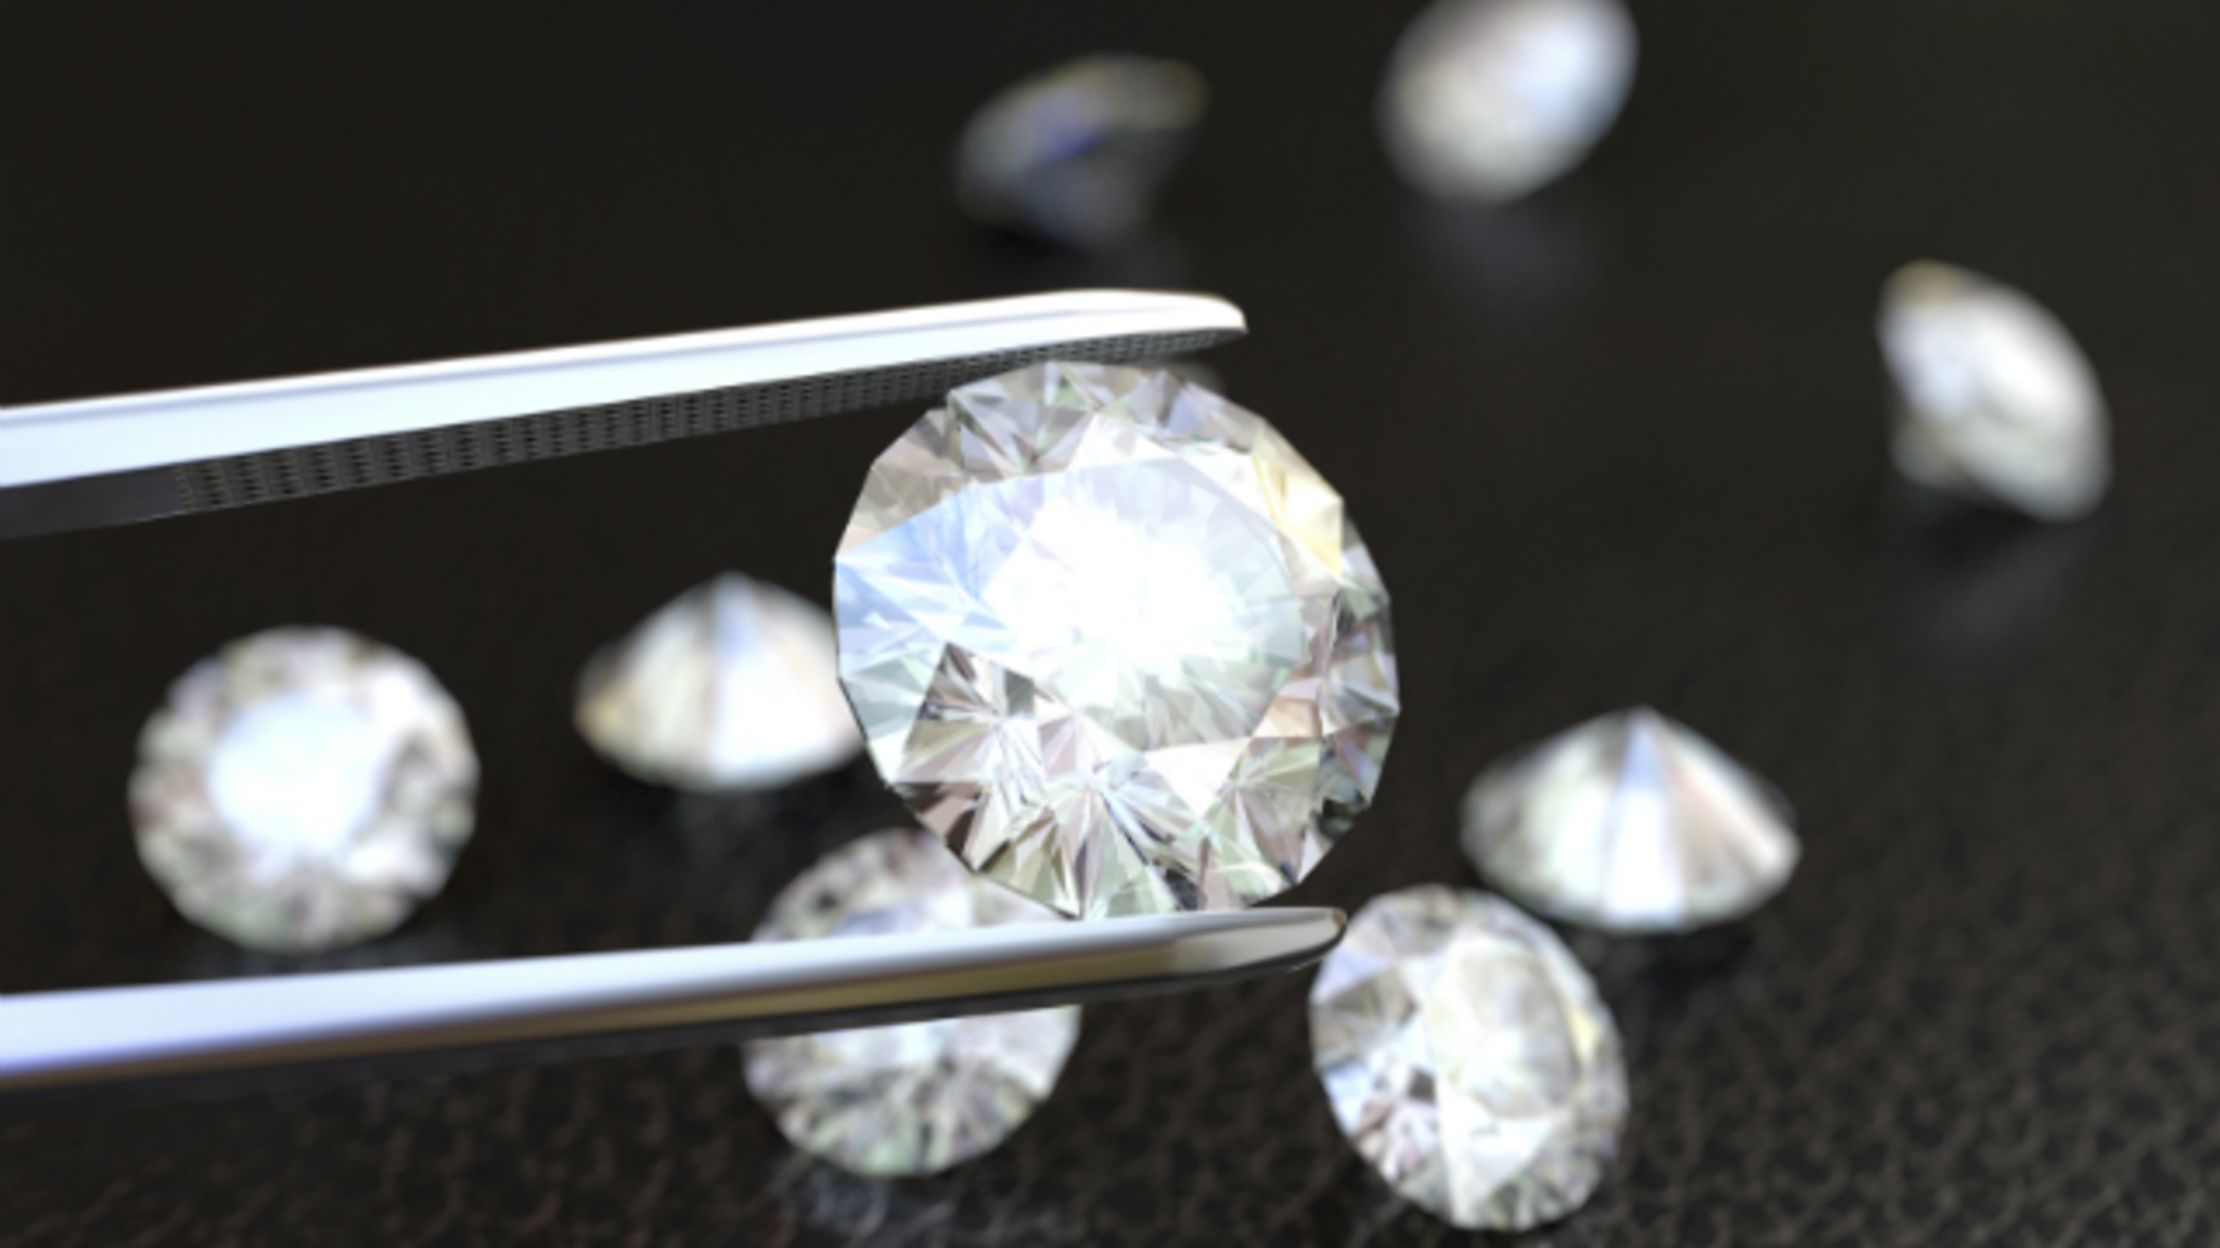 Why Do Diamonds Cost So Much? | Mental Floss